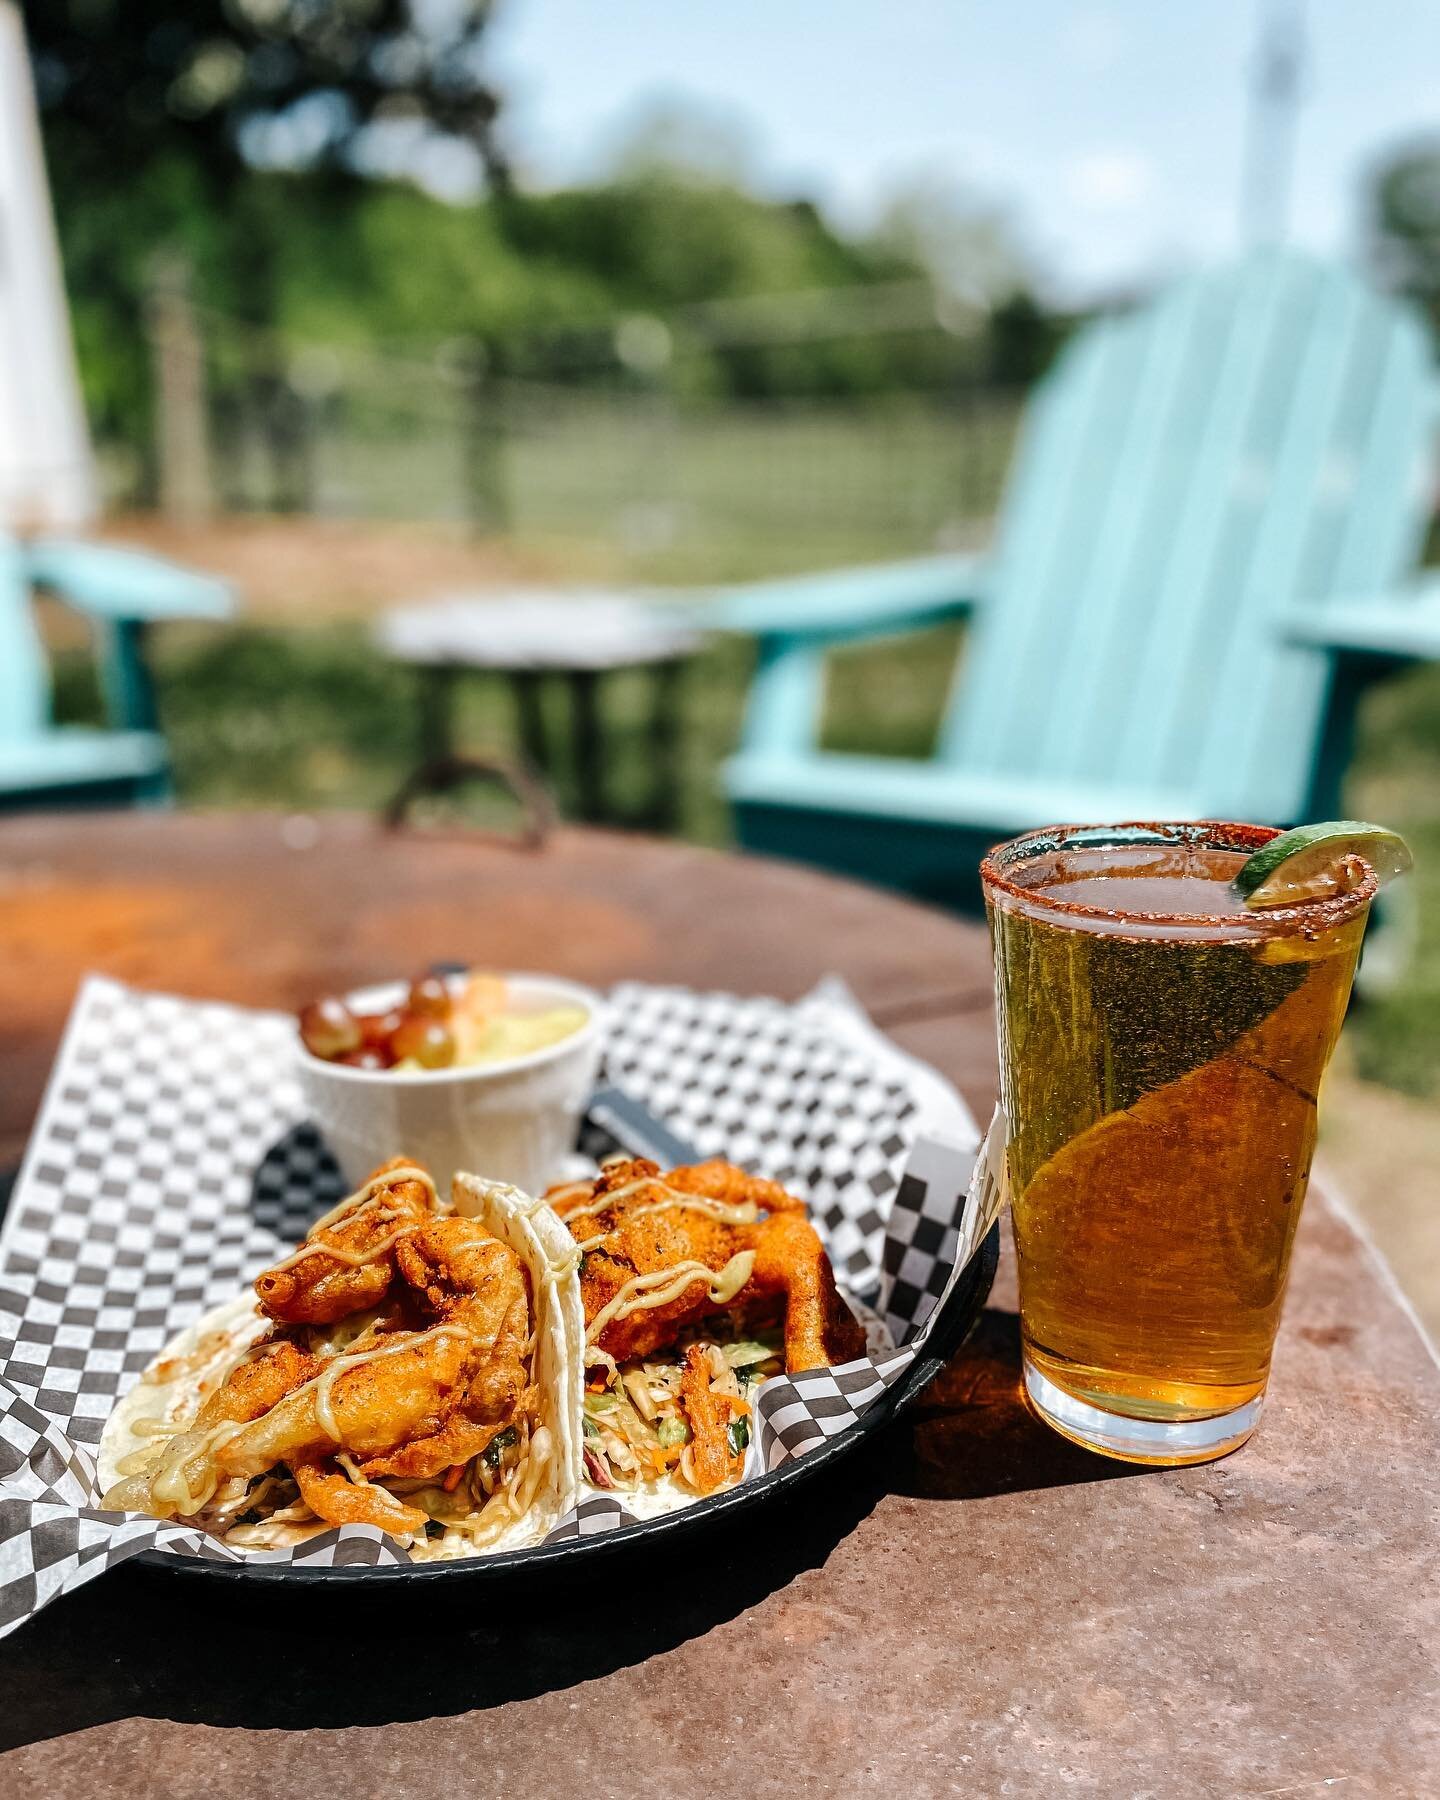 &lsquo;Tis the season. Soft-shell crabs are here as long as we can get them! 🦀🌮 Check out our stories for all of today&rsquo;s features.